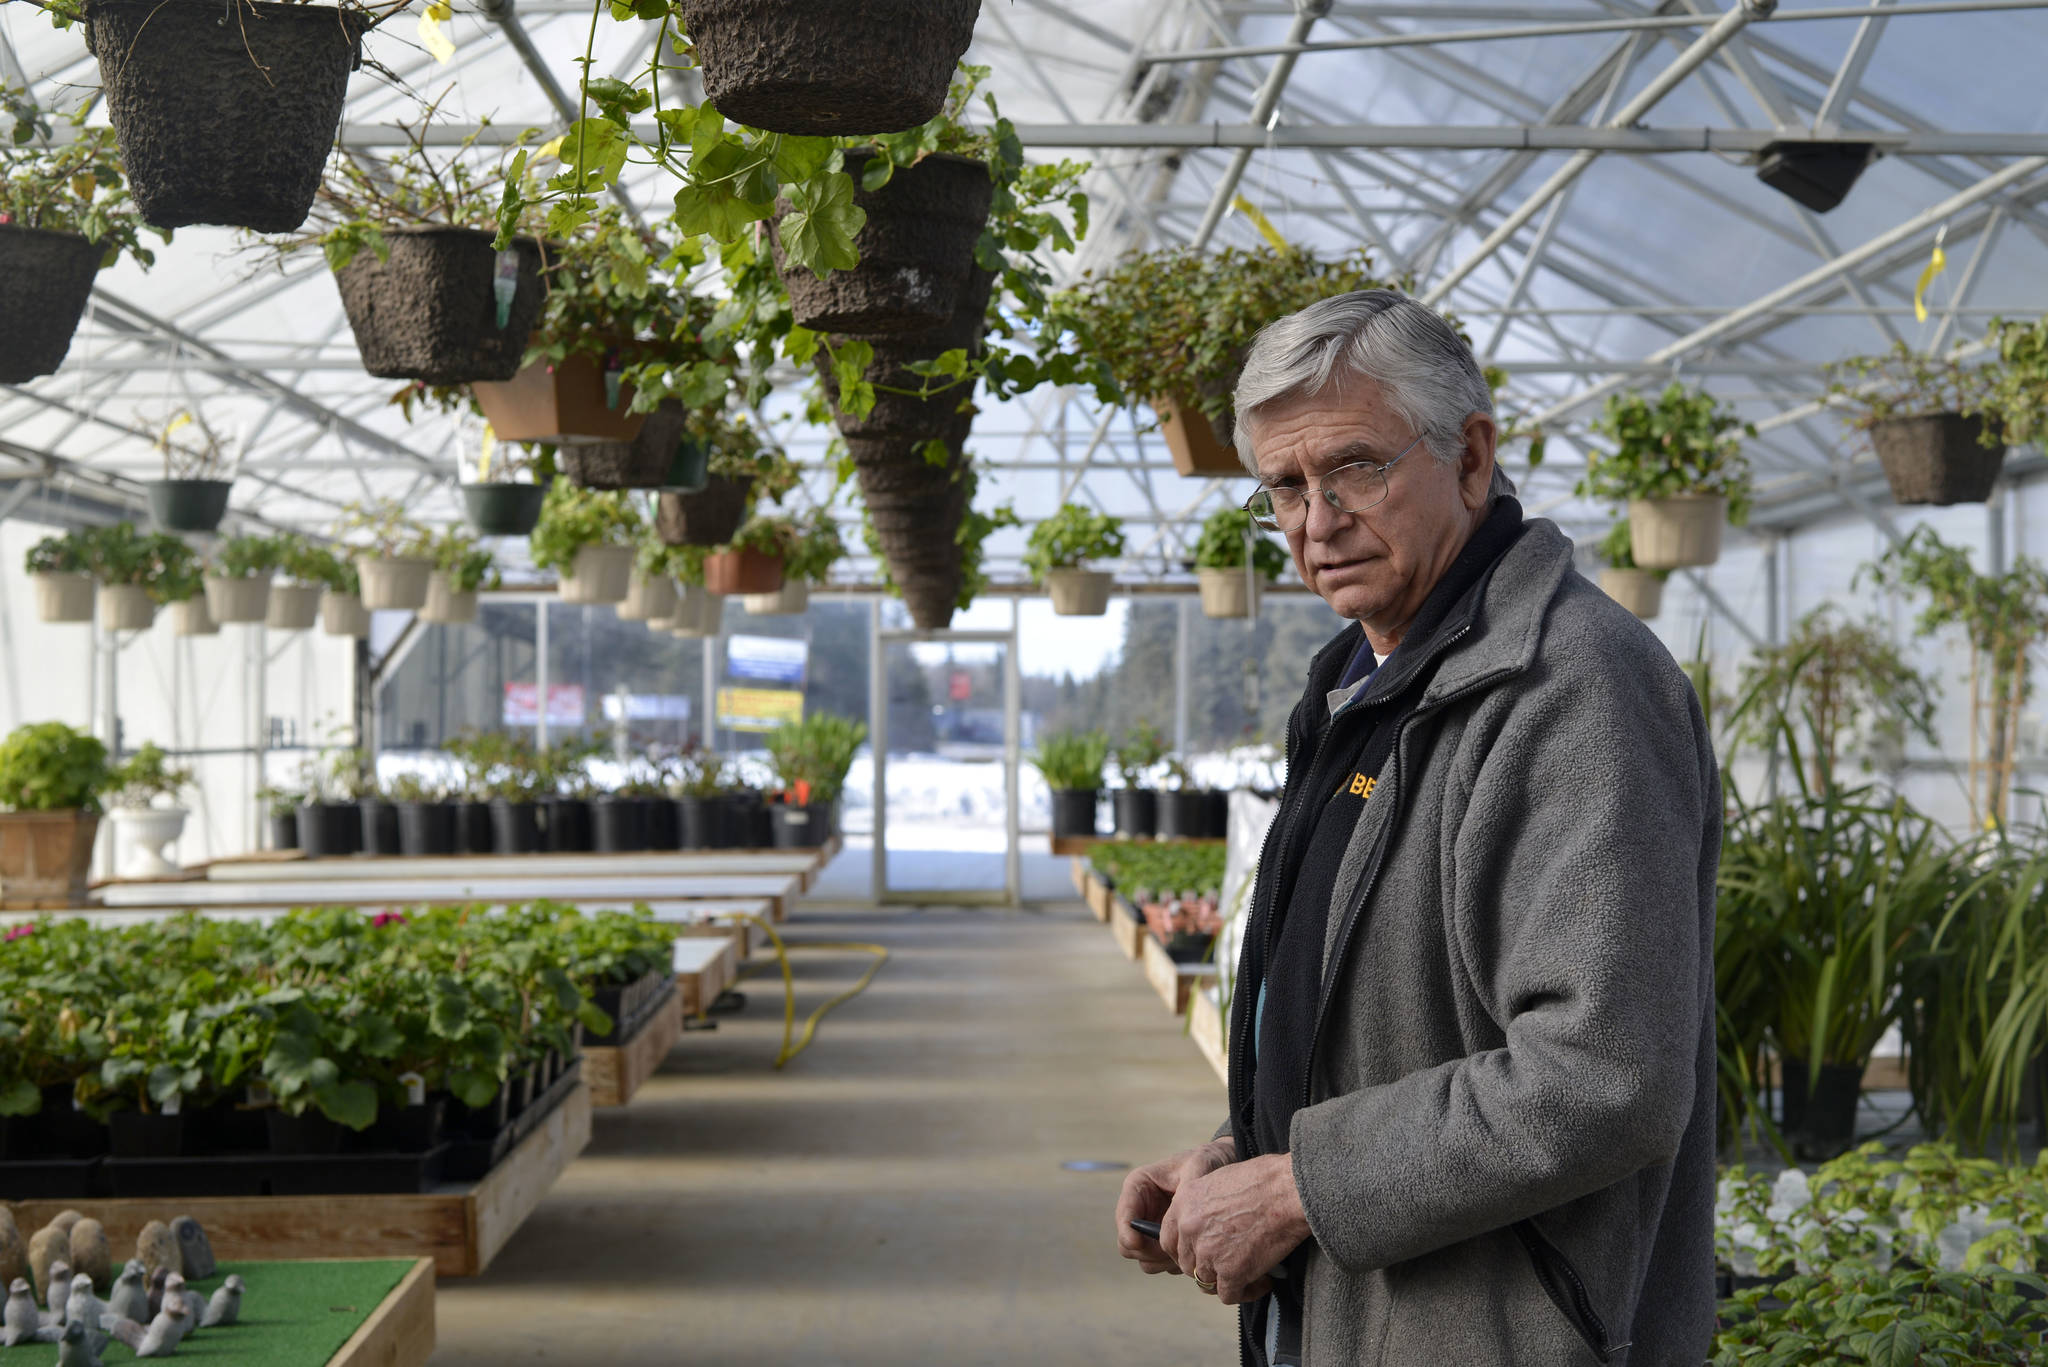 Ron Sexton, owner of Trinity Greenhouse in Soldotna, opened his doors to the public on March 1, but has been working all winter long to get his greenhouses ready for the 2017 season. (Kat Sorensen/Peninsula Clarion)